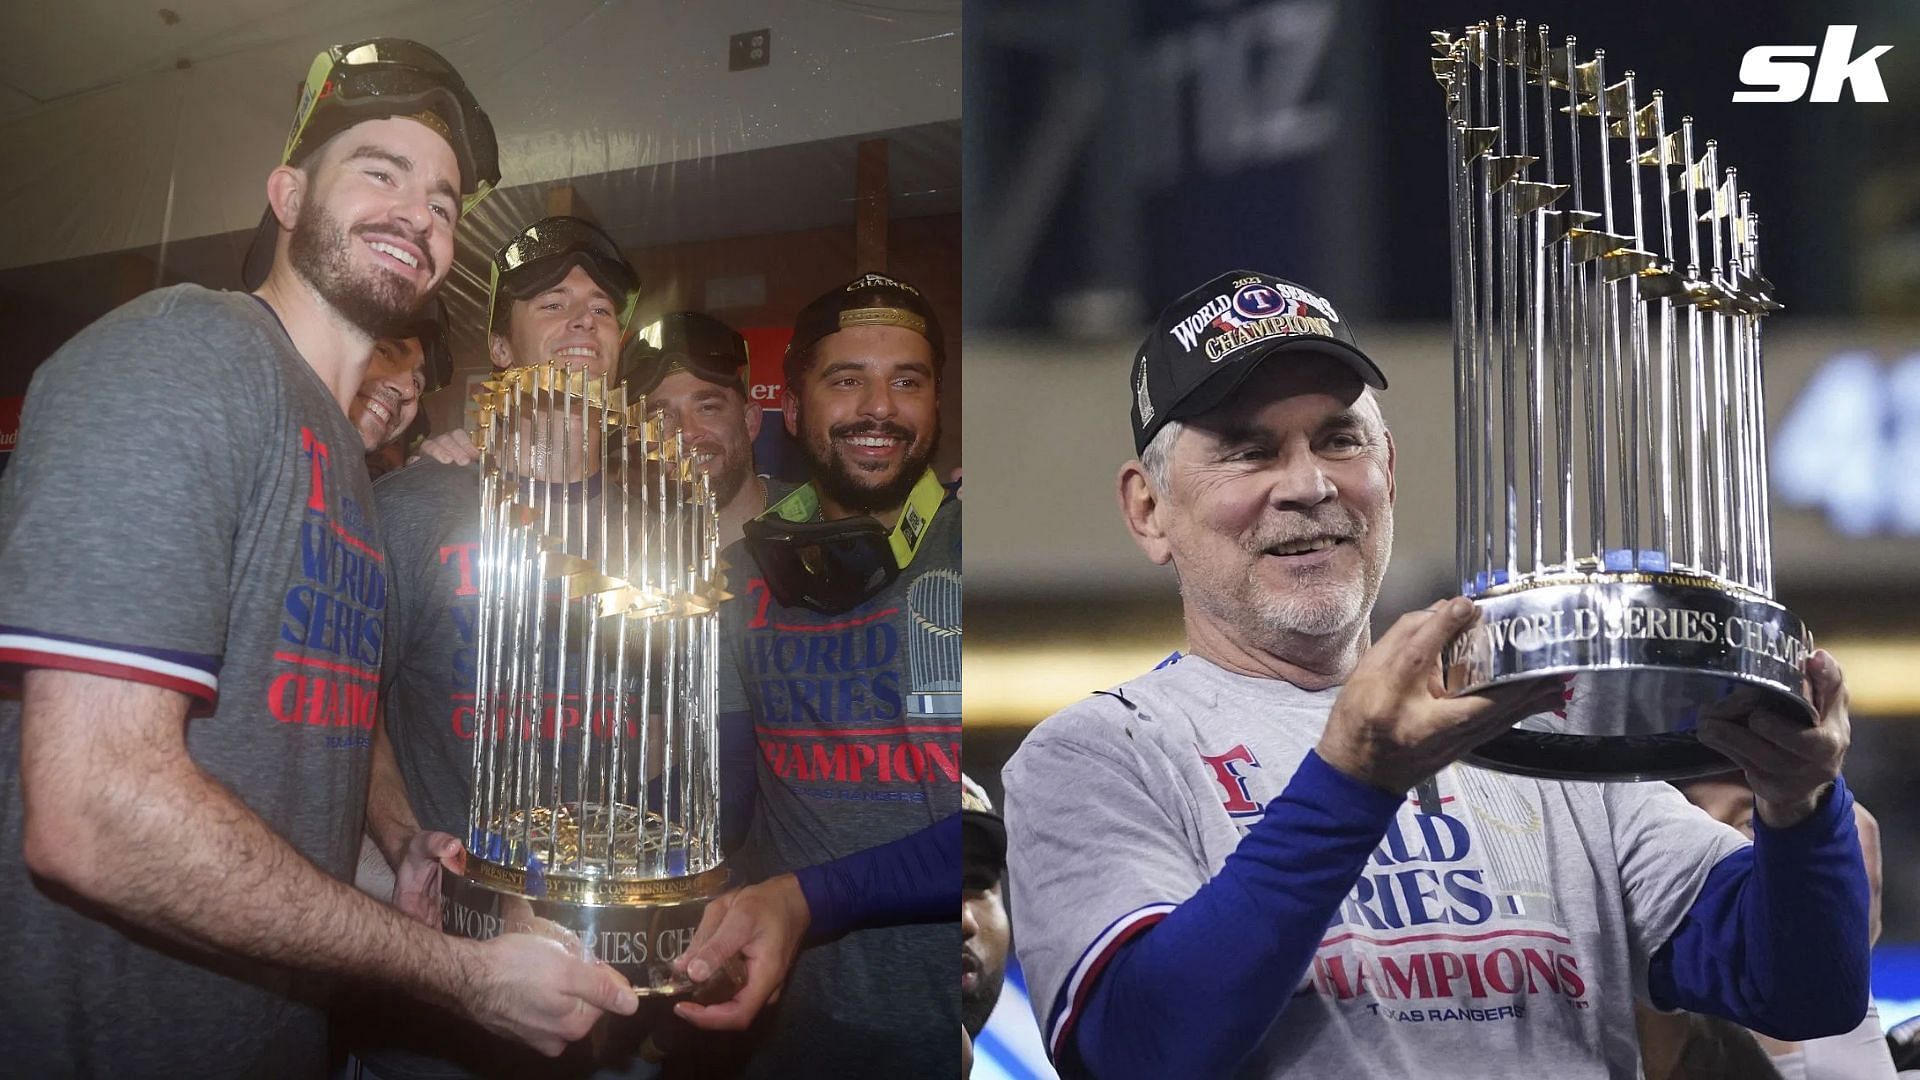 How much does the World Series trophy cost?